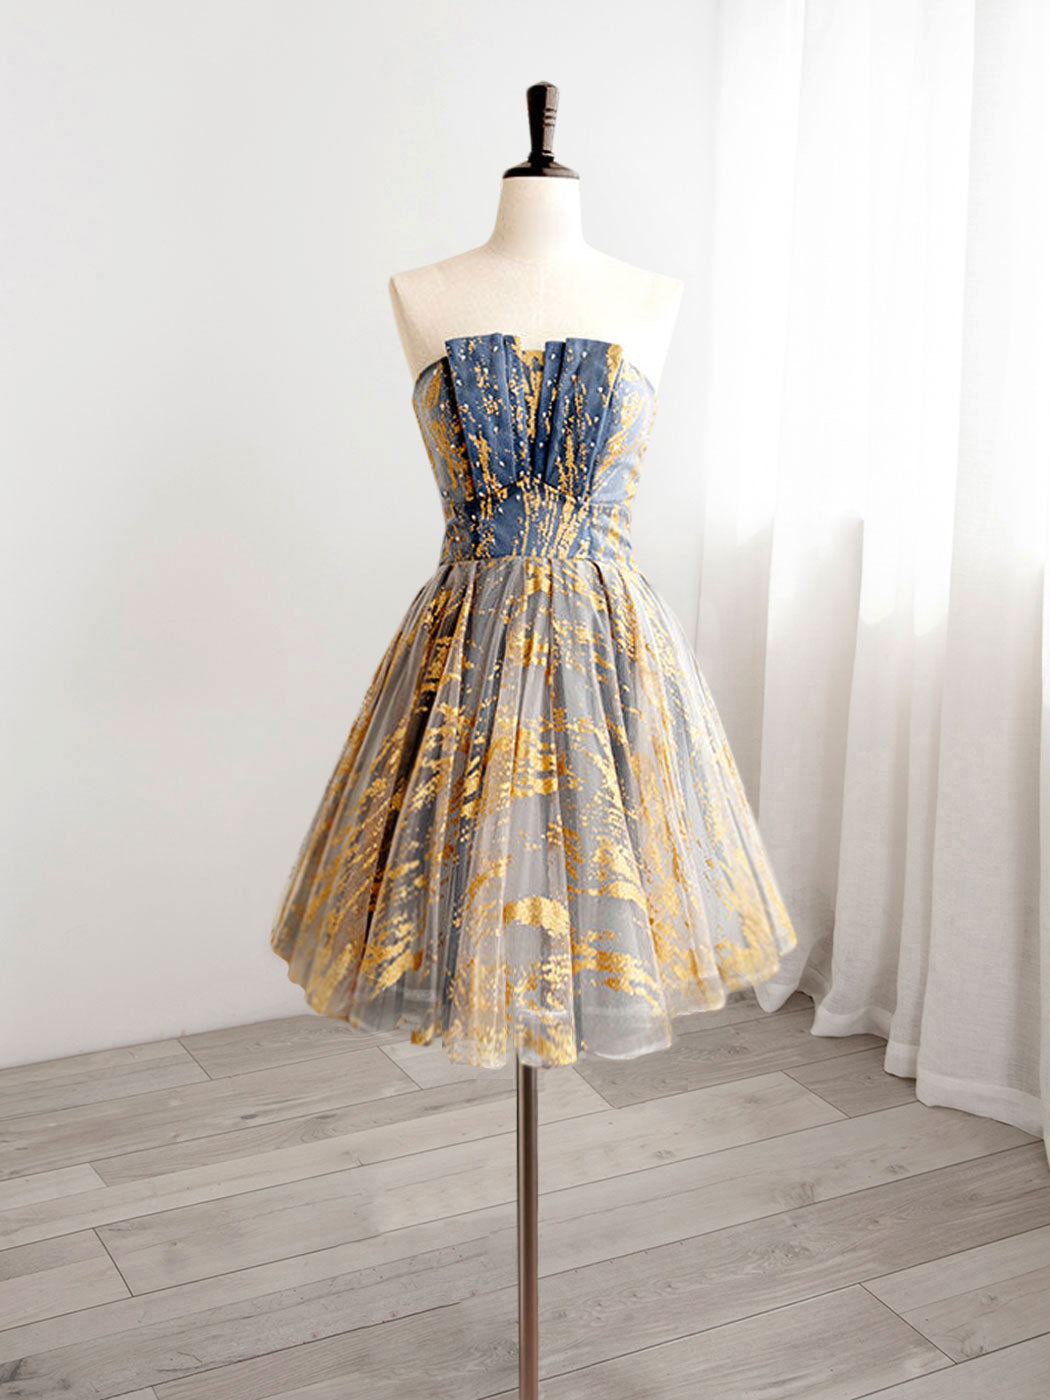 Strapless Gold/Blue Short Homecoming Dress 8th Grade Formal Dress - DollyGown